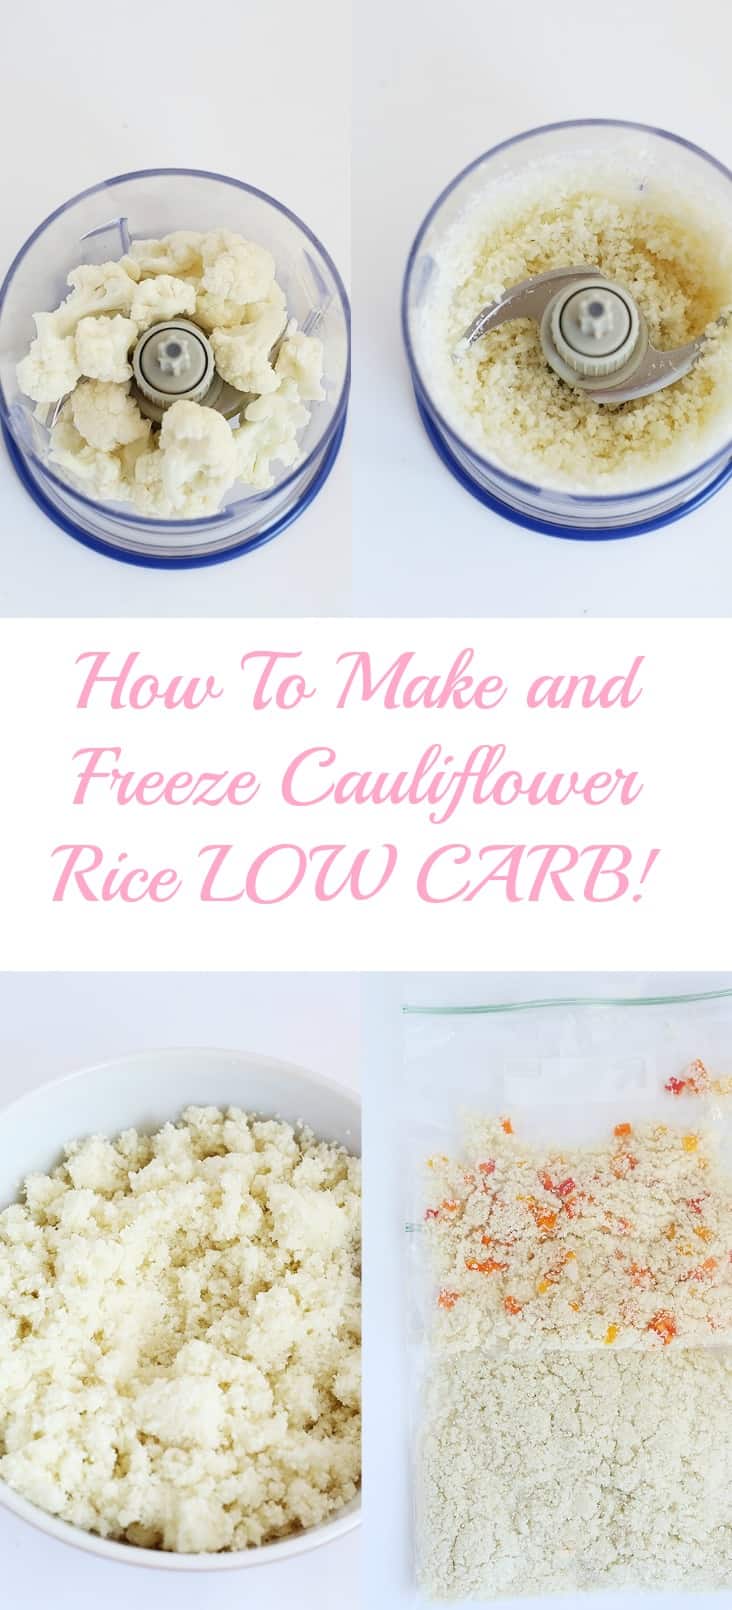 How to Make and Freeze Cauliflower Rice. Cauliflower rice is low carb, healthy, packed with health benefits and super easy to make! / TwoRaspberries.com